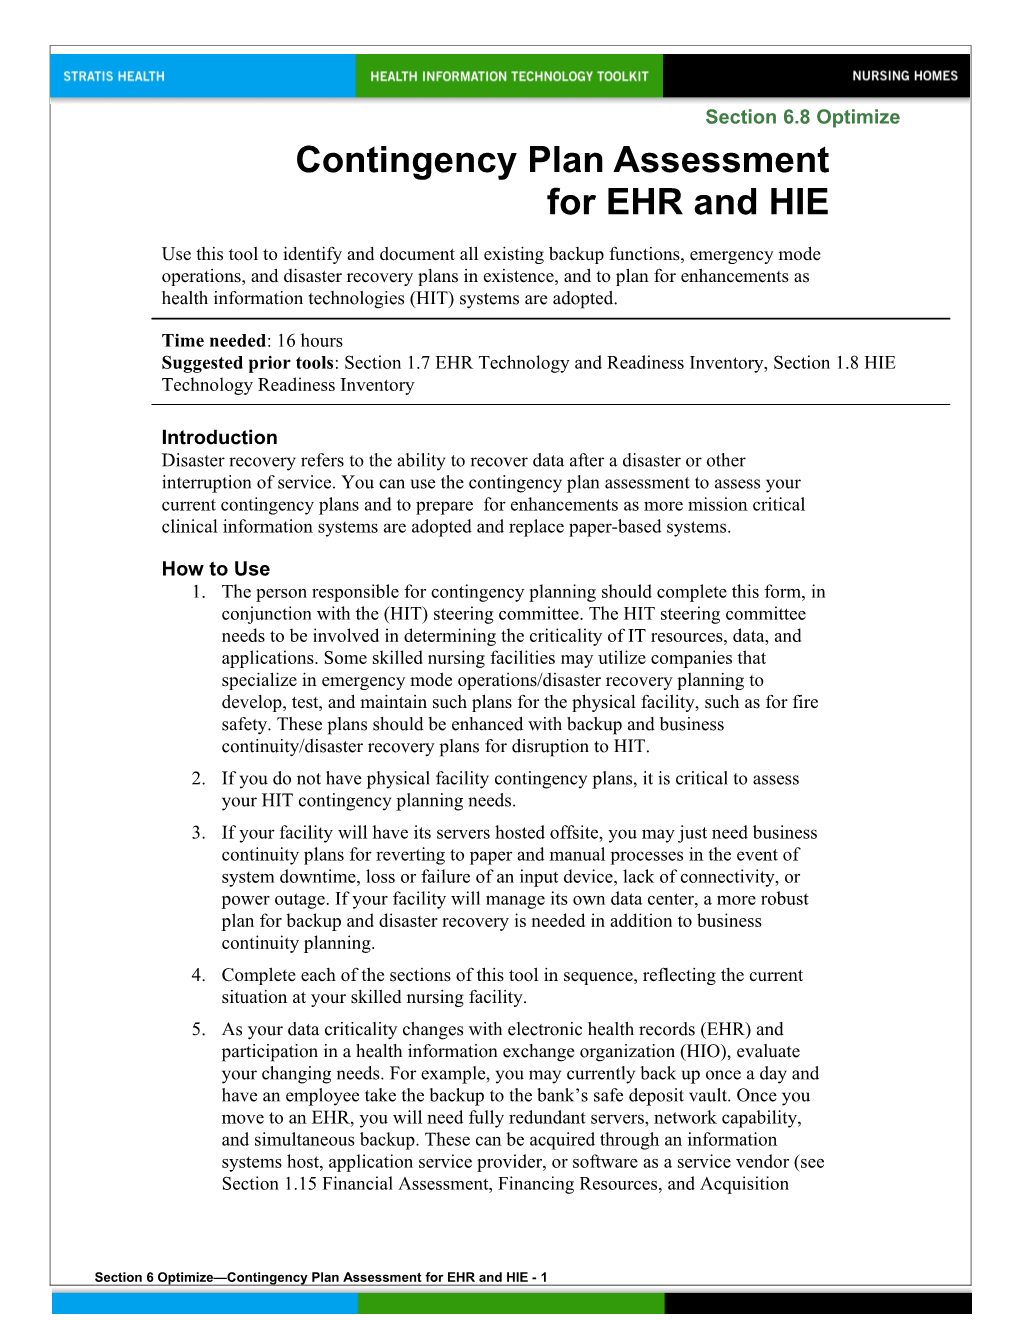 6 Contingency Plan Assessment for EHR and HIE